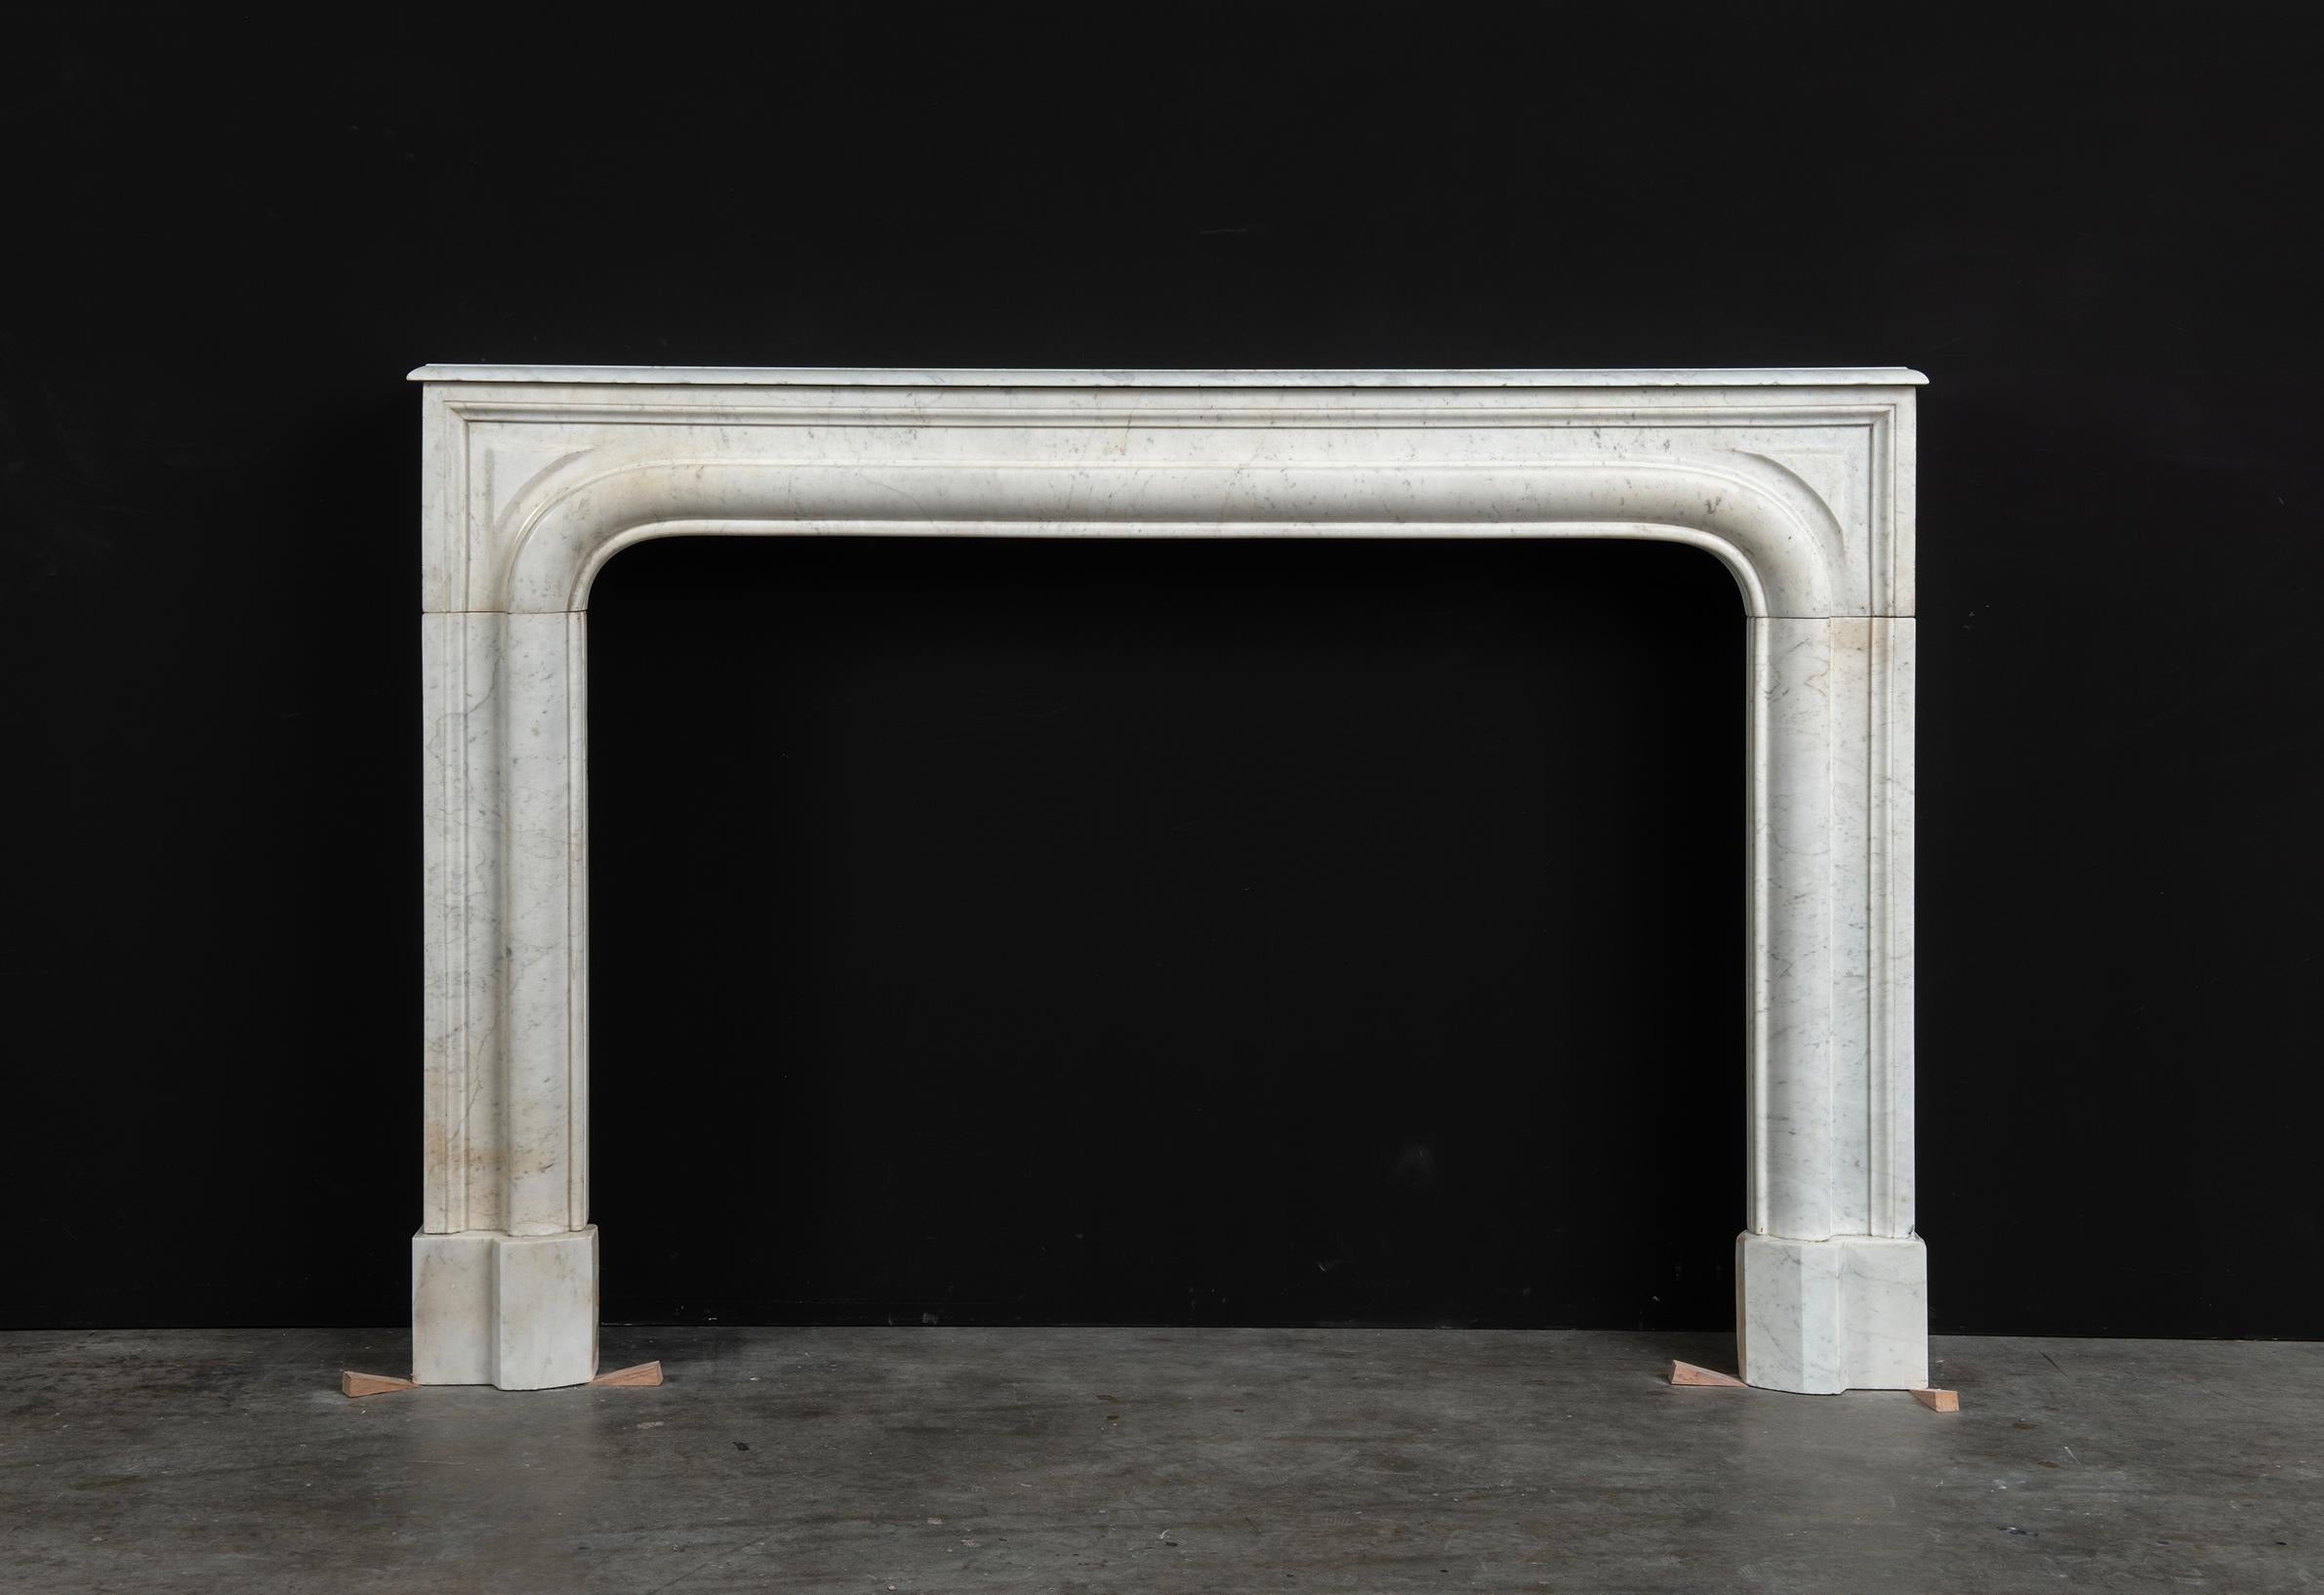 Very nice profiled white marble fireplace from France.
This nice sized 19th century mantel has a nice profiled topshelf above an arched frieze with a strong profile that continuous in the jambs al the way down to the shaped endblocks.

It is in nice